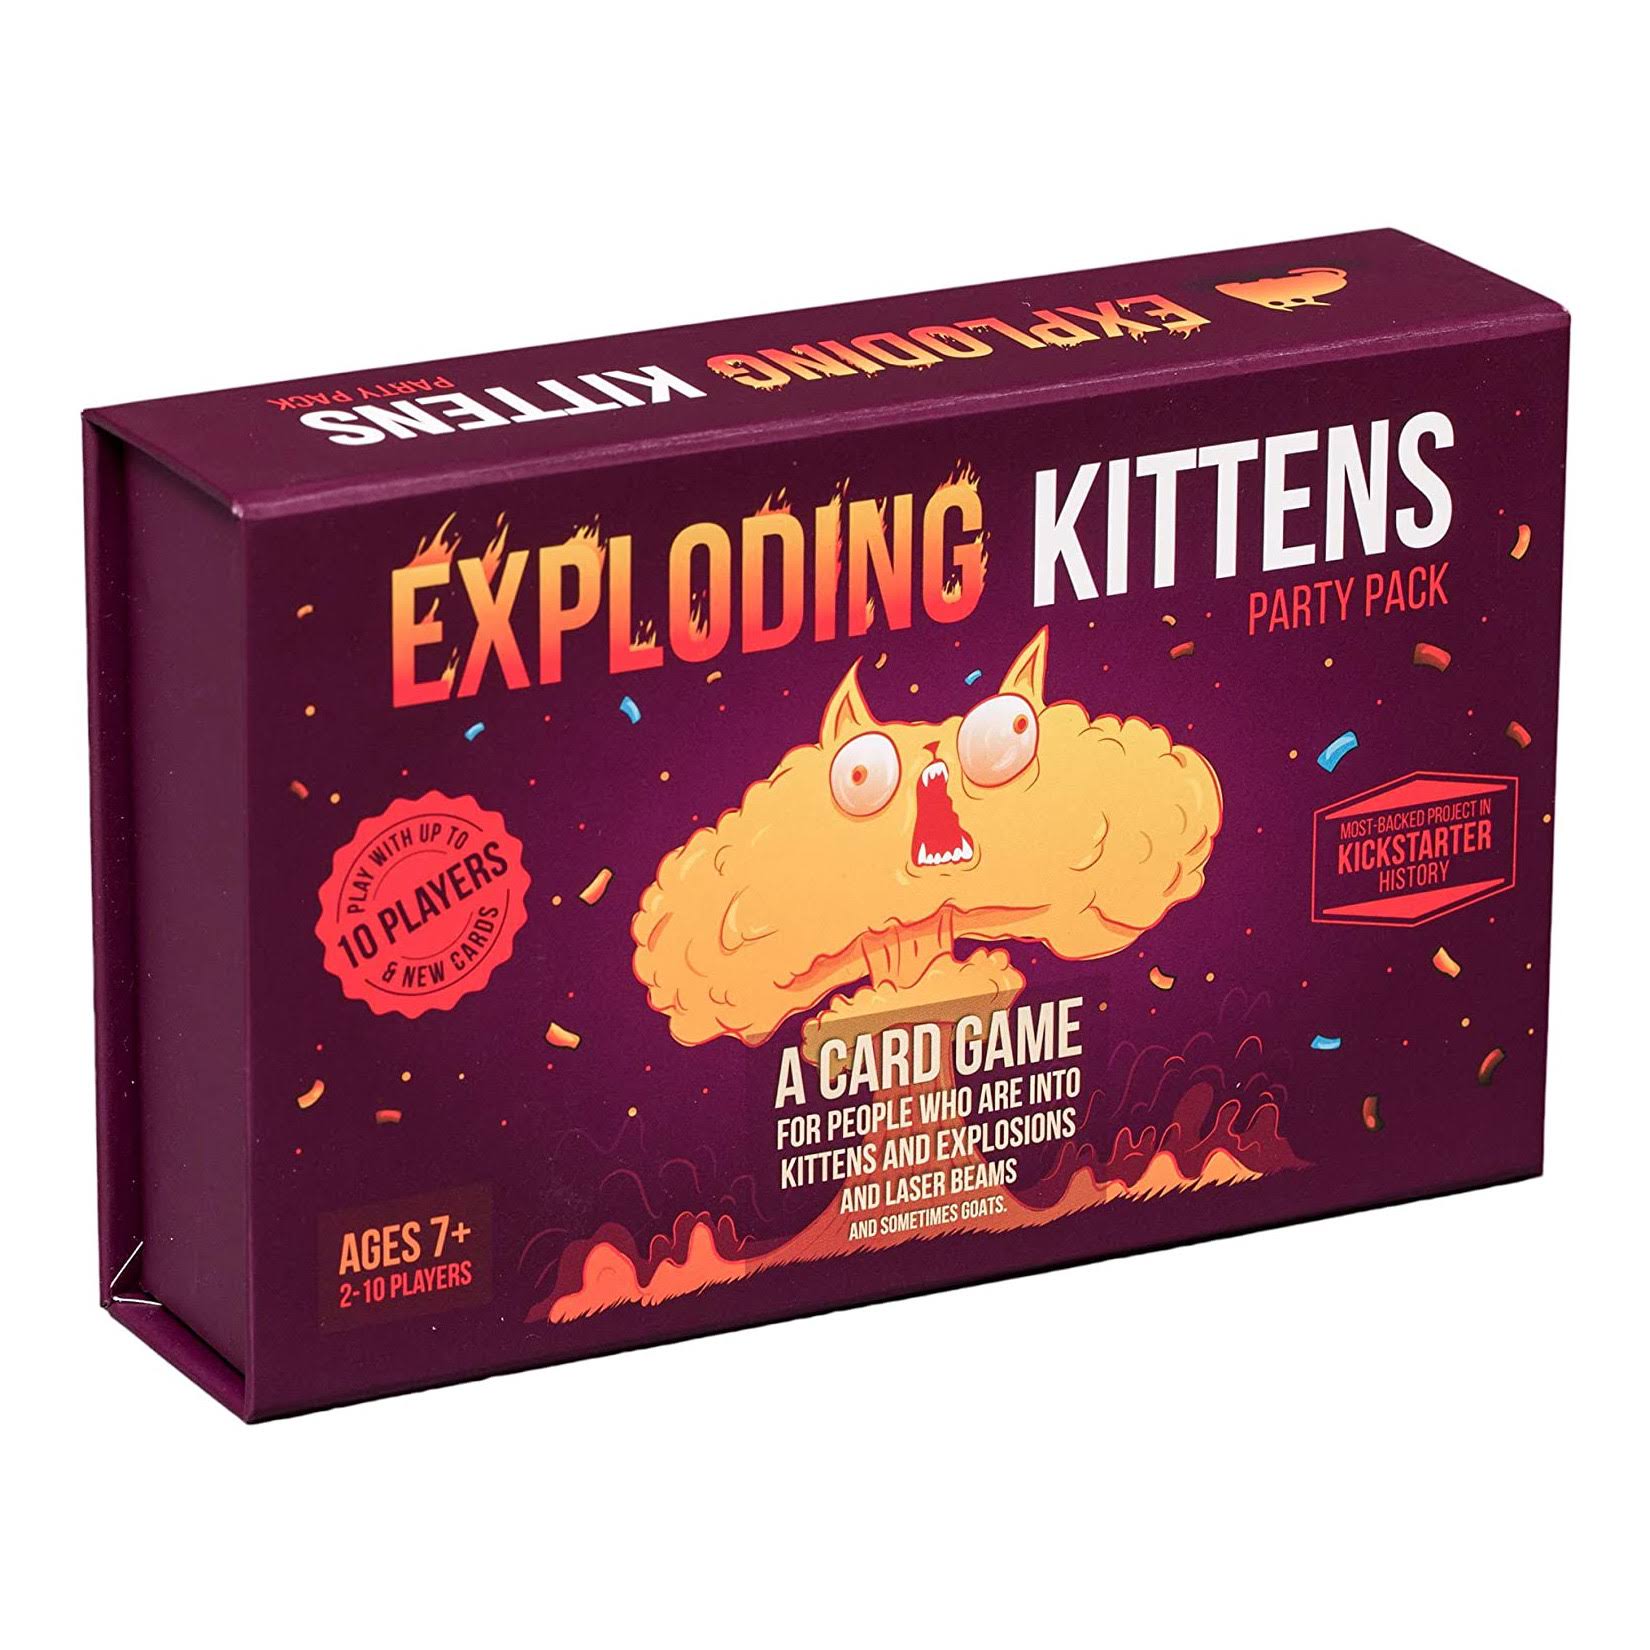 Exploding Kittens Card Game - 10 Player Party Pack